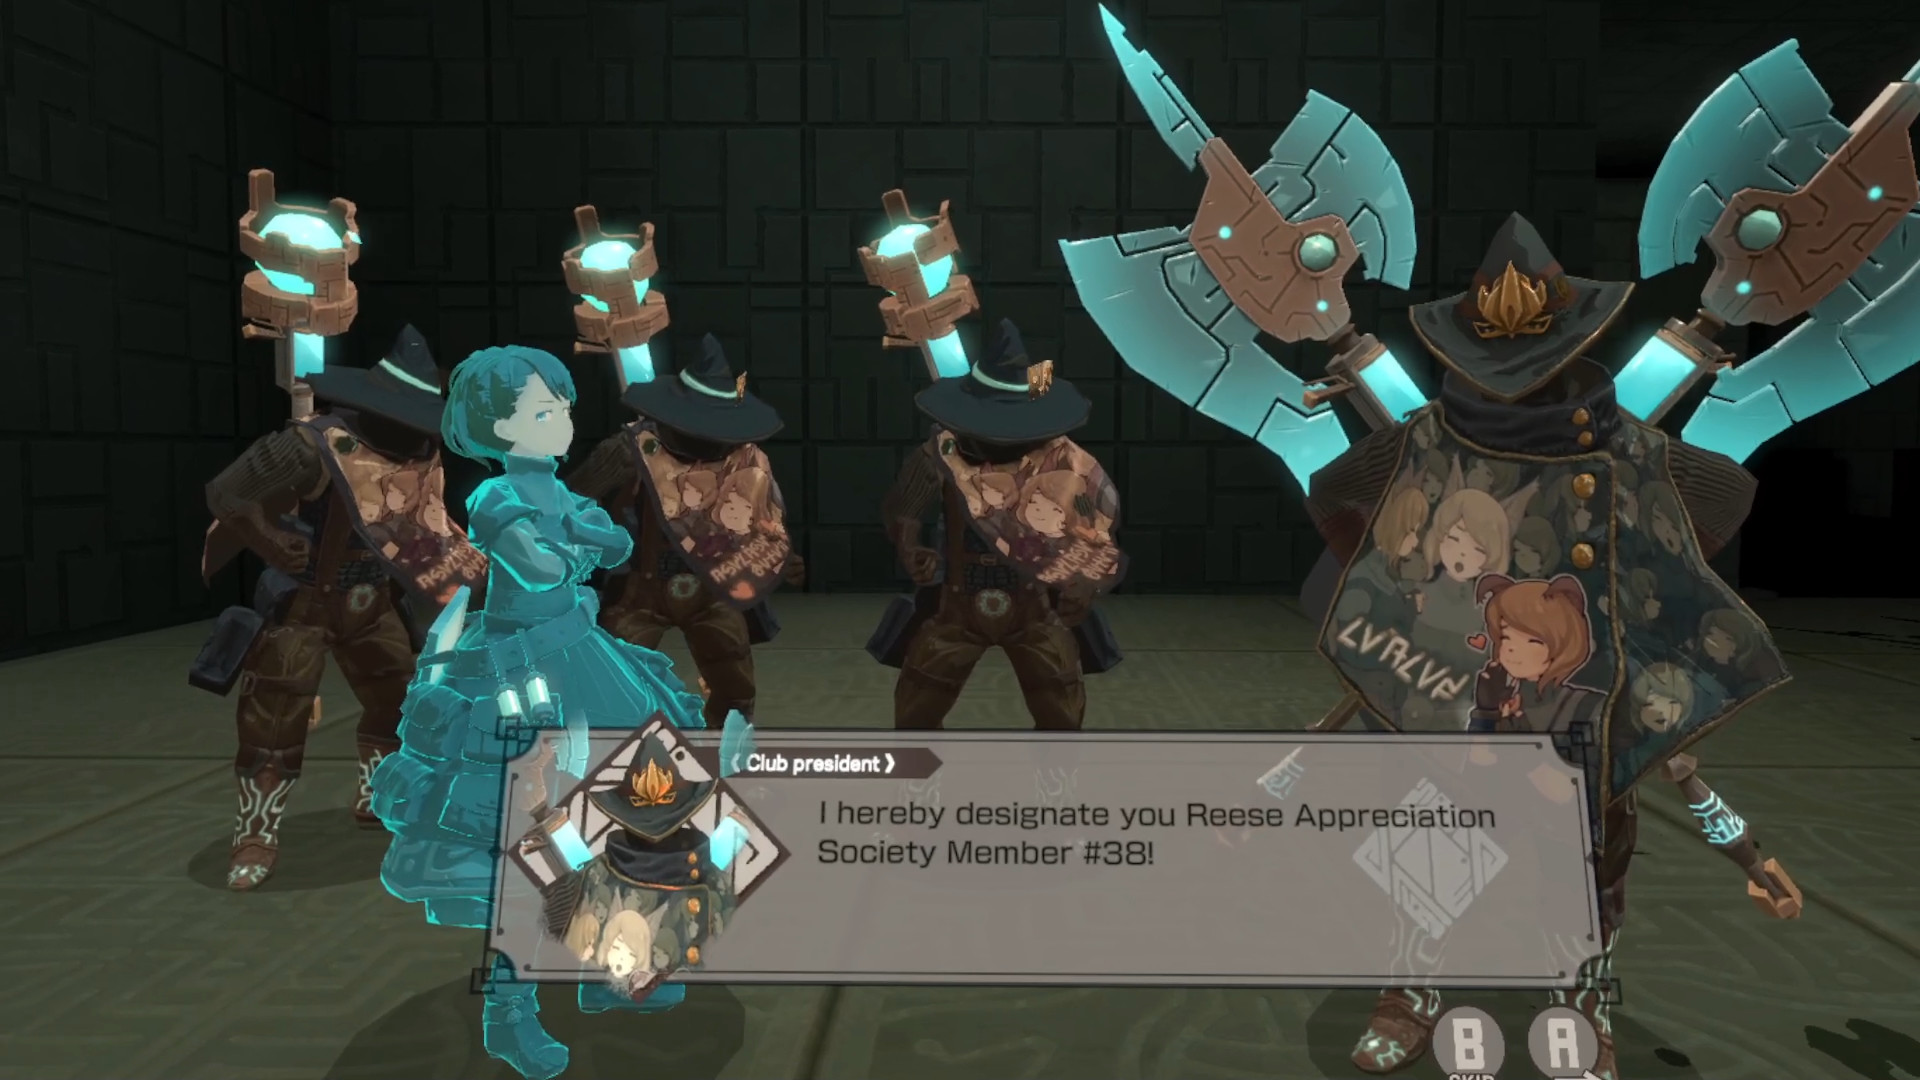 Talk to a character in Ruinsmagus